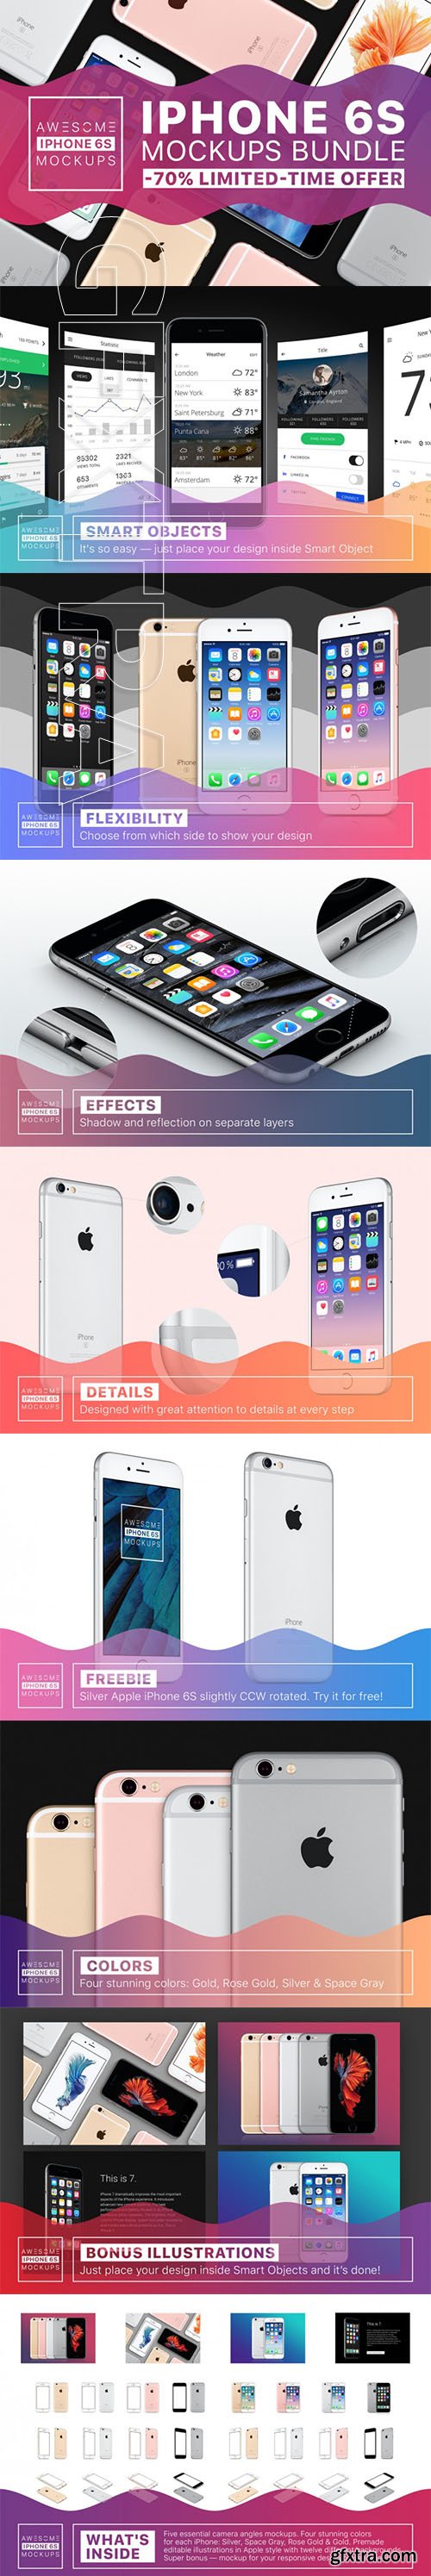 Awesome iPhone 6S Mockups